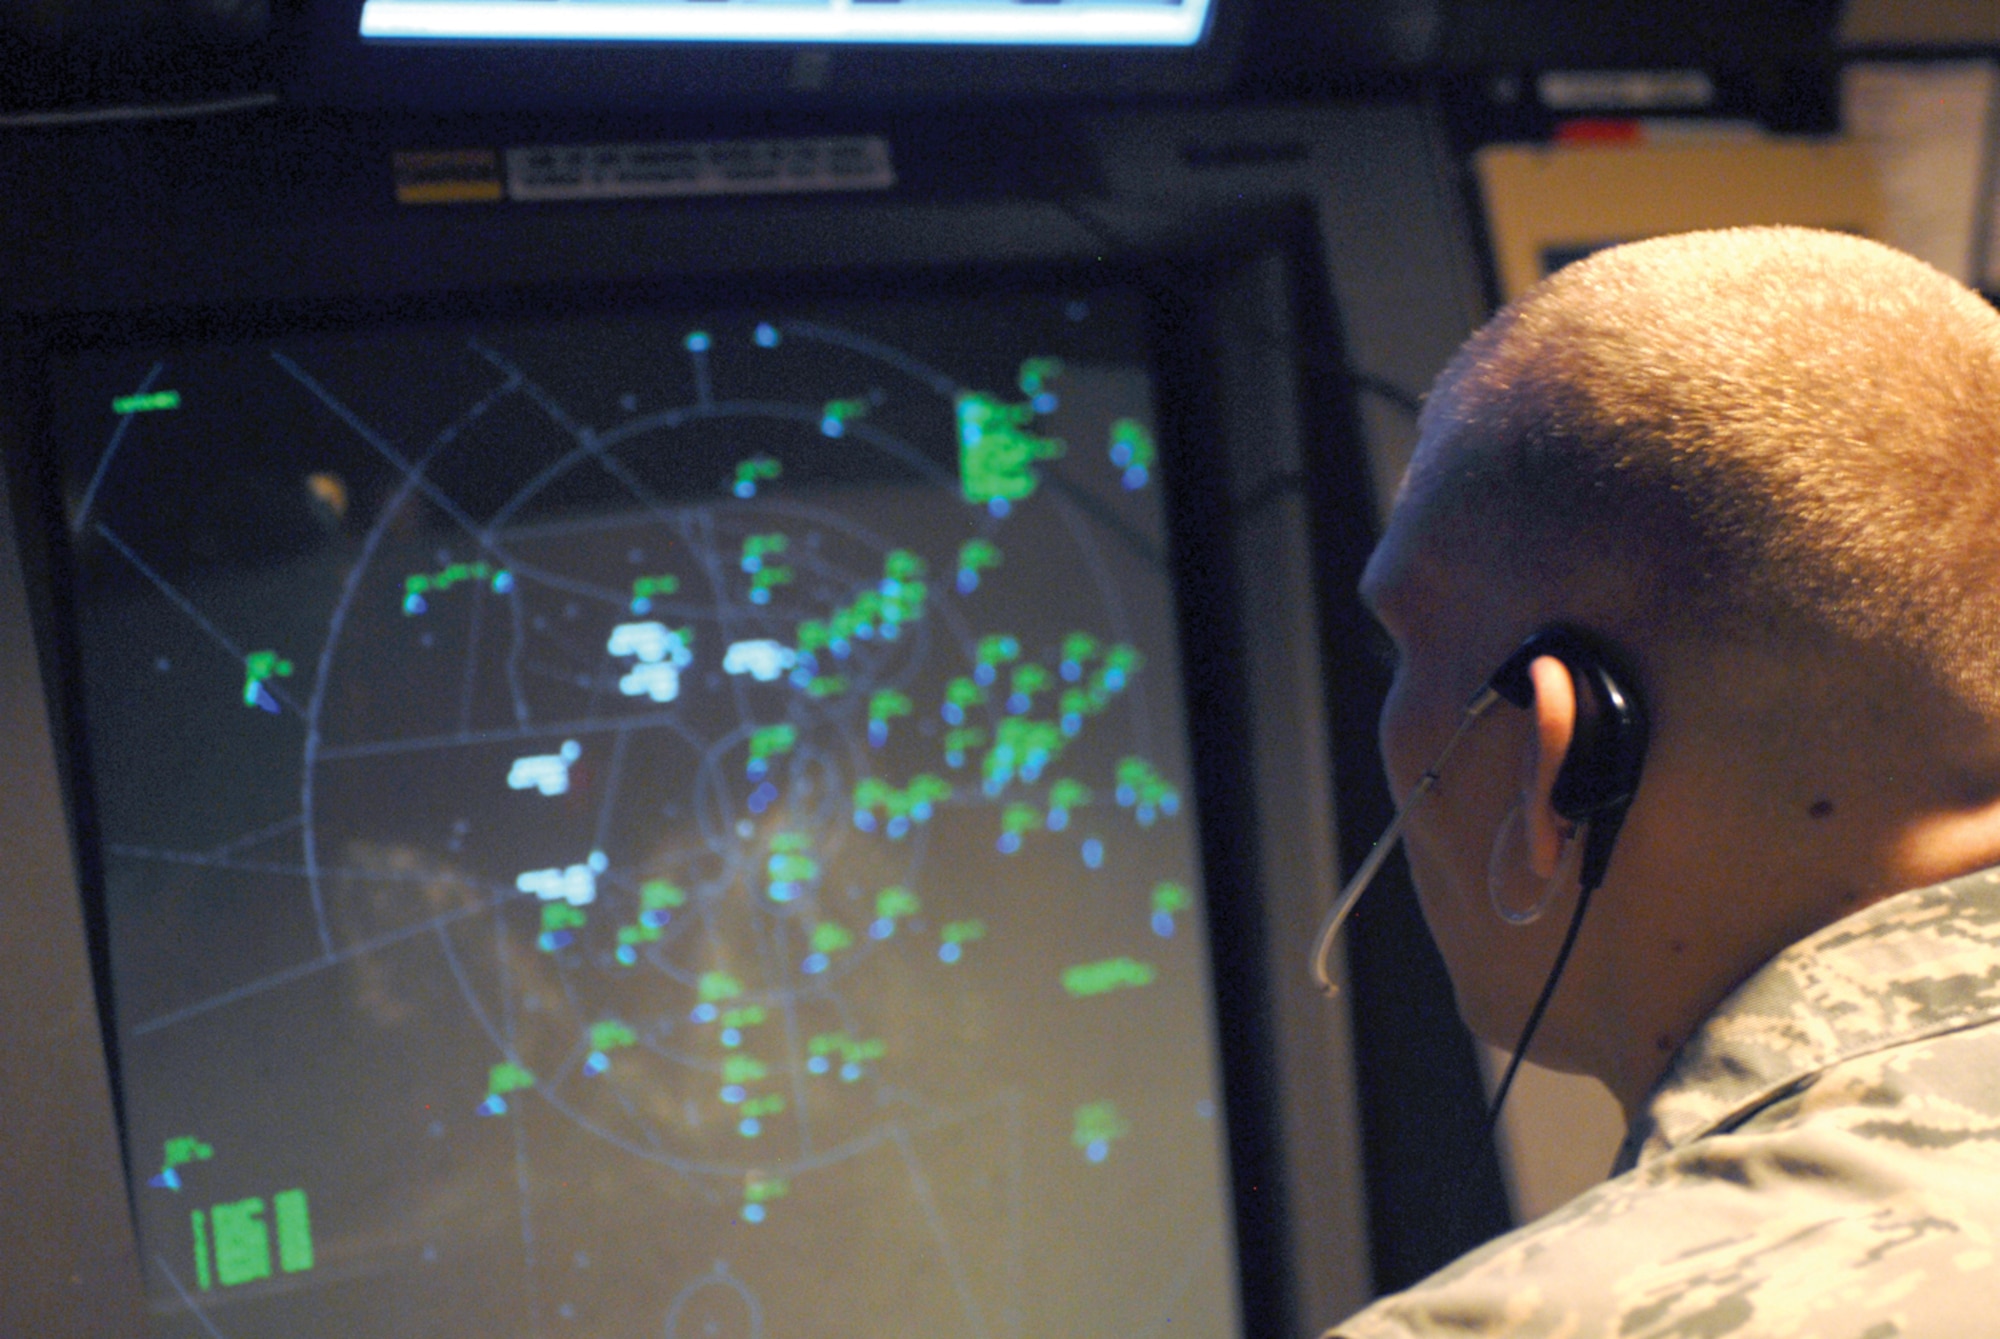 Airman 1st Class Benjamin Shrewsberry, 56th Operations Support Squadron, watches the moving radar screen showing planes flying over Luke and advising them of others flying nearby.(U.S. Air Force photo/ Airman 1st Class Sandra Welch)